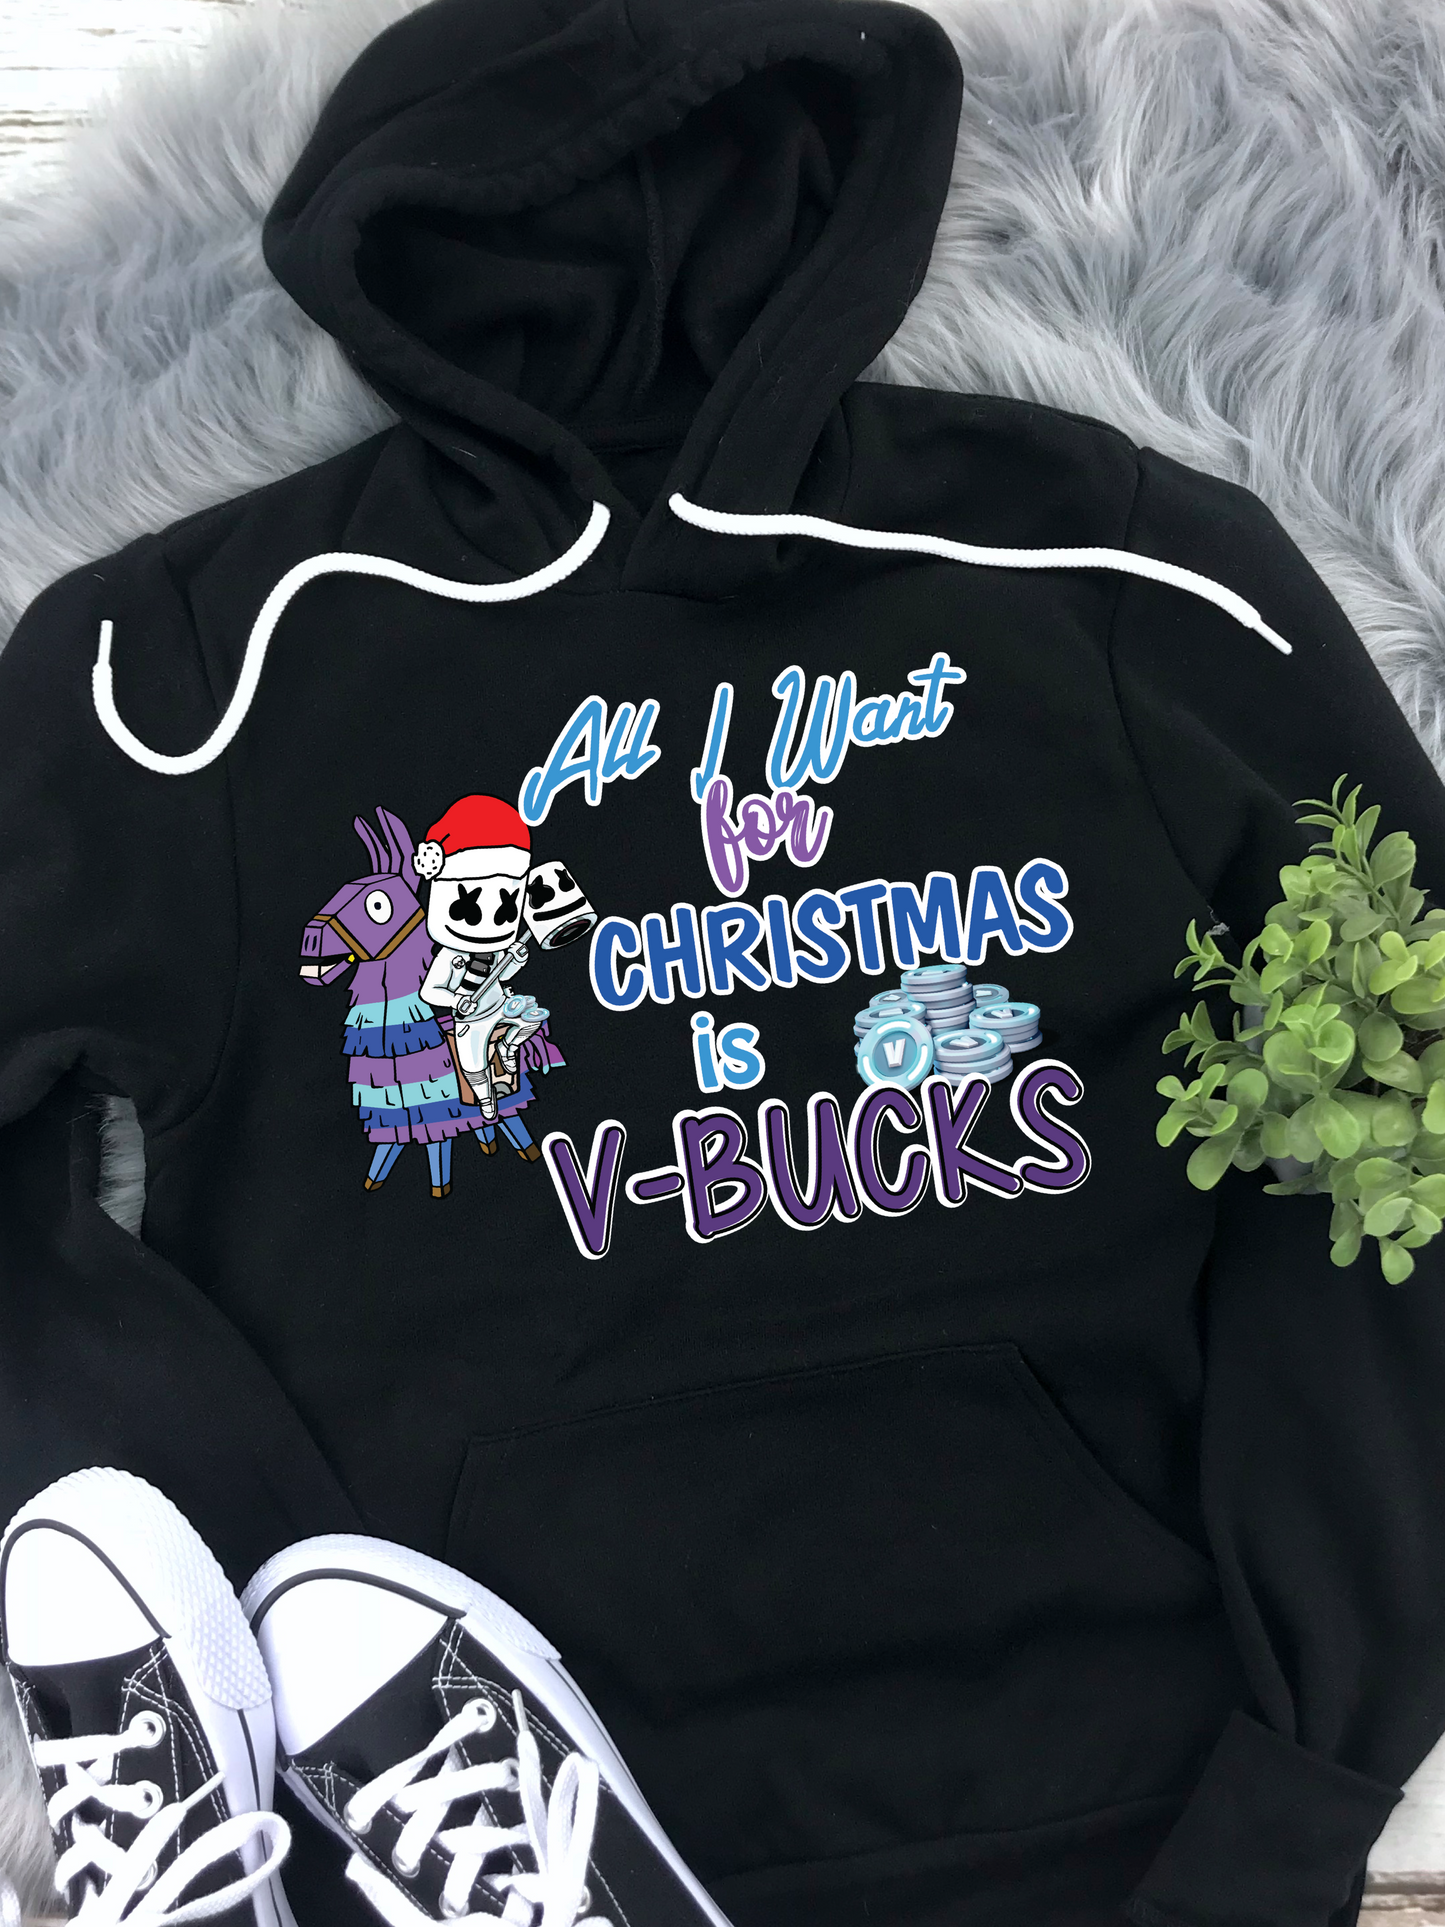 All I want for Christmas is V-bucks Christmas DTF TRANSFERSPRINT TO ORDER DTF TRANSFERPRINT TO ORDER